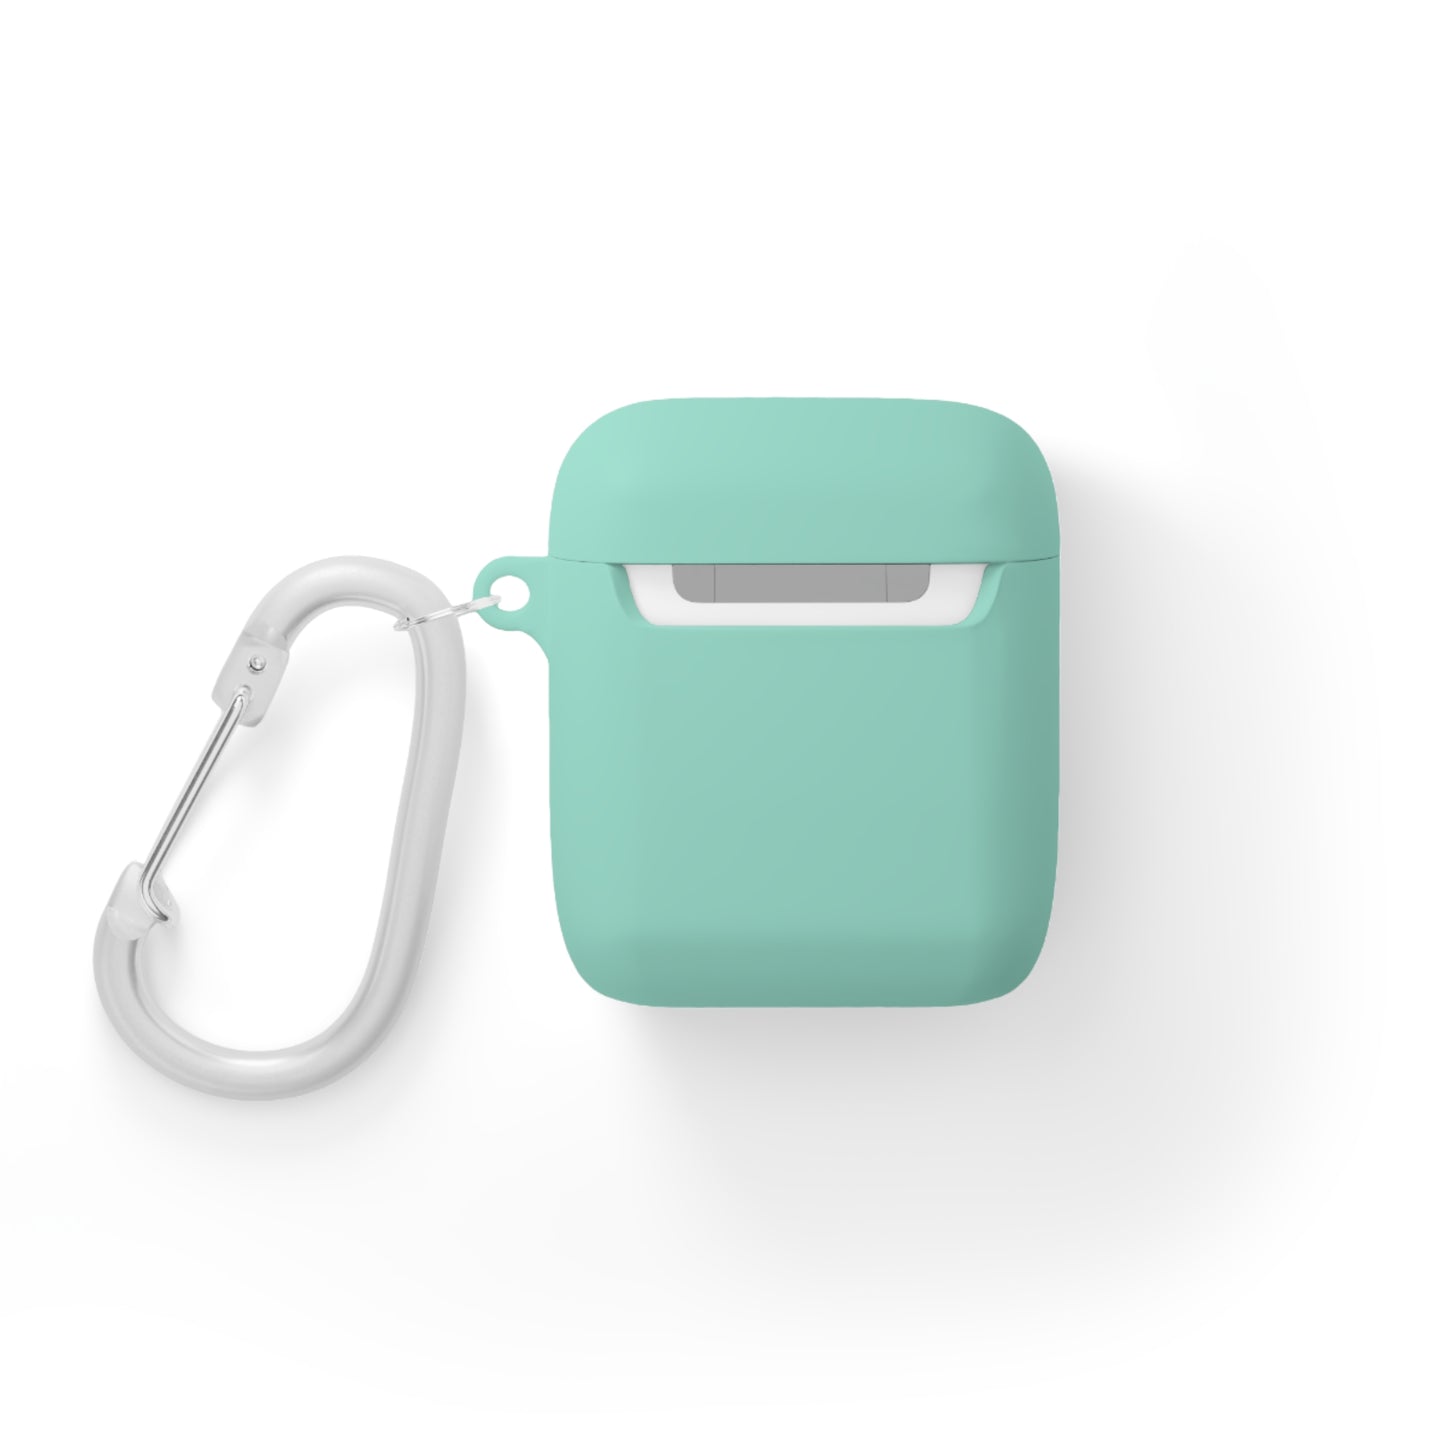 Exclusive Challenger Silhouette AirPods Case: Rev Up Your Style!